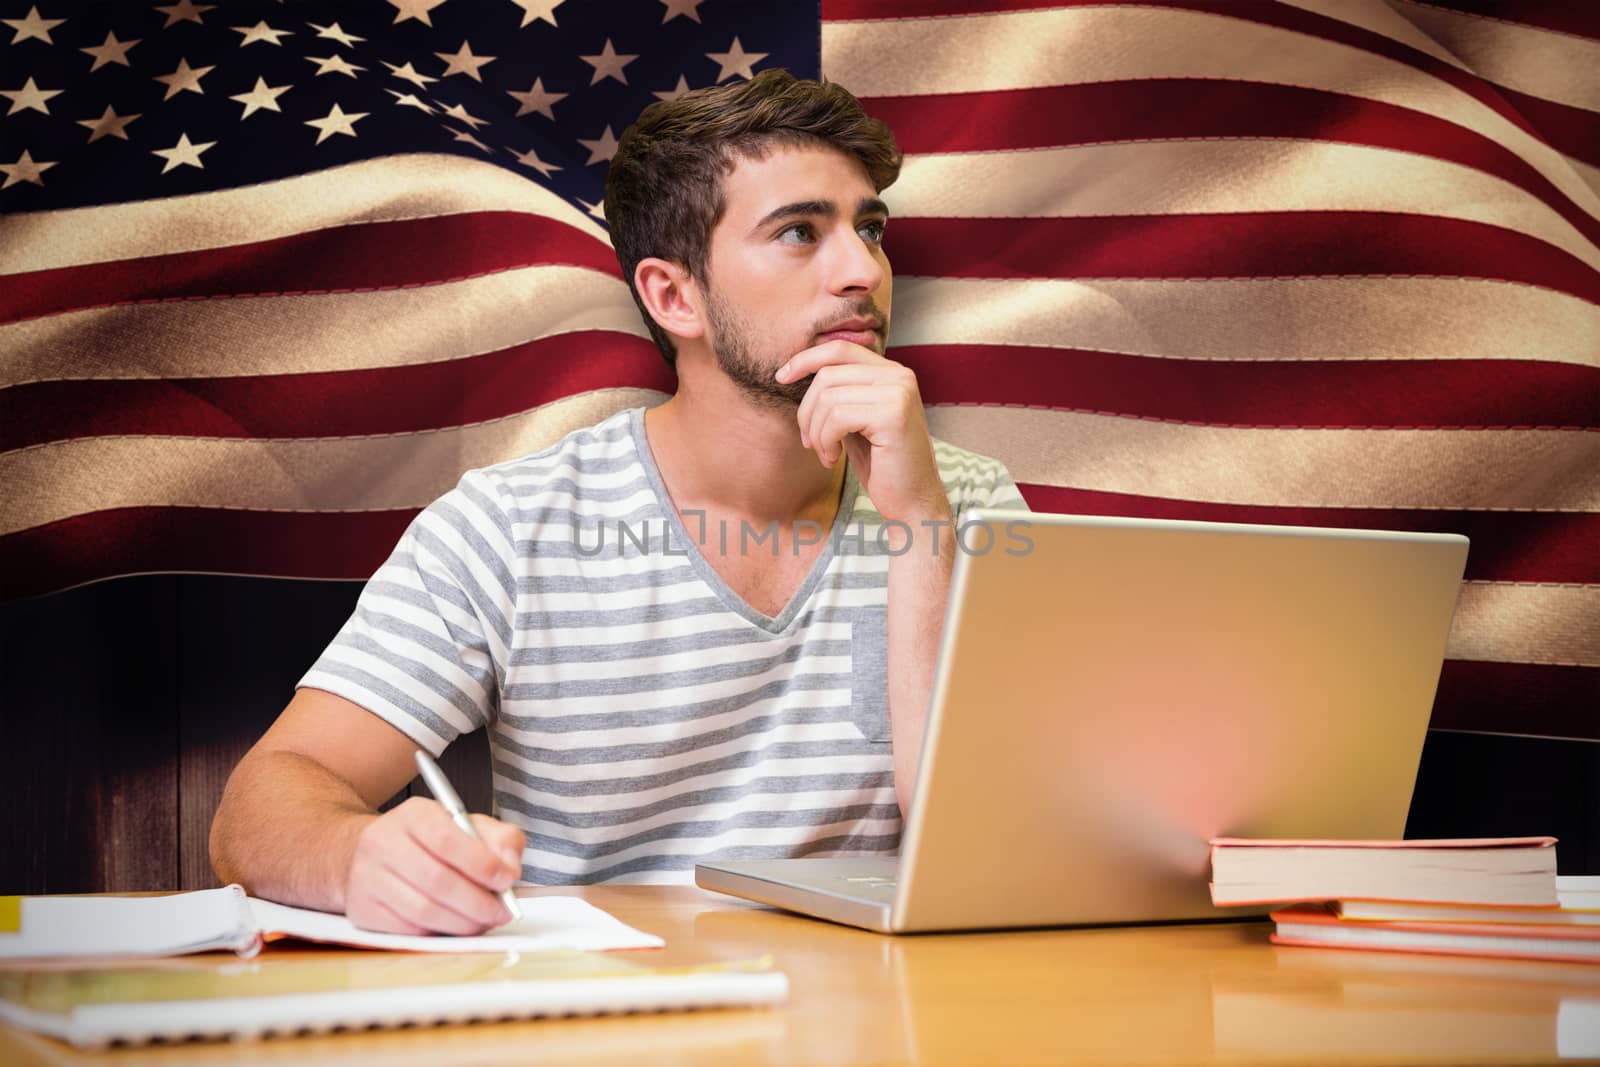 Student studying in the library with laptop against composite image of digitally generated united states national flag